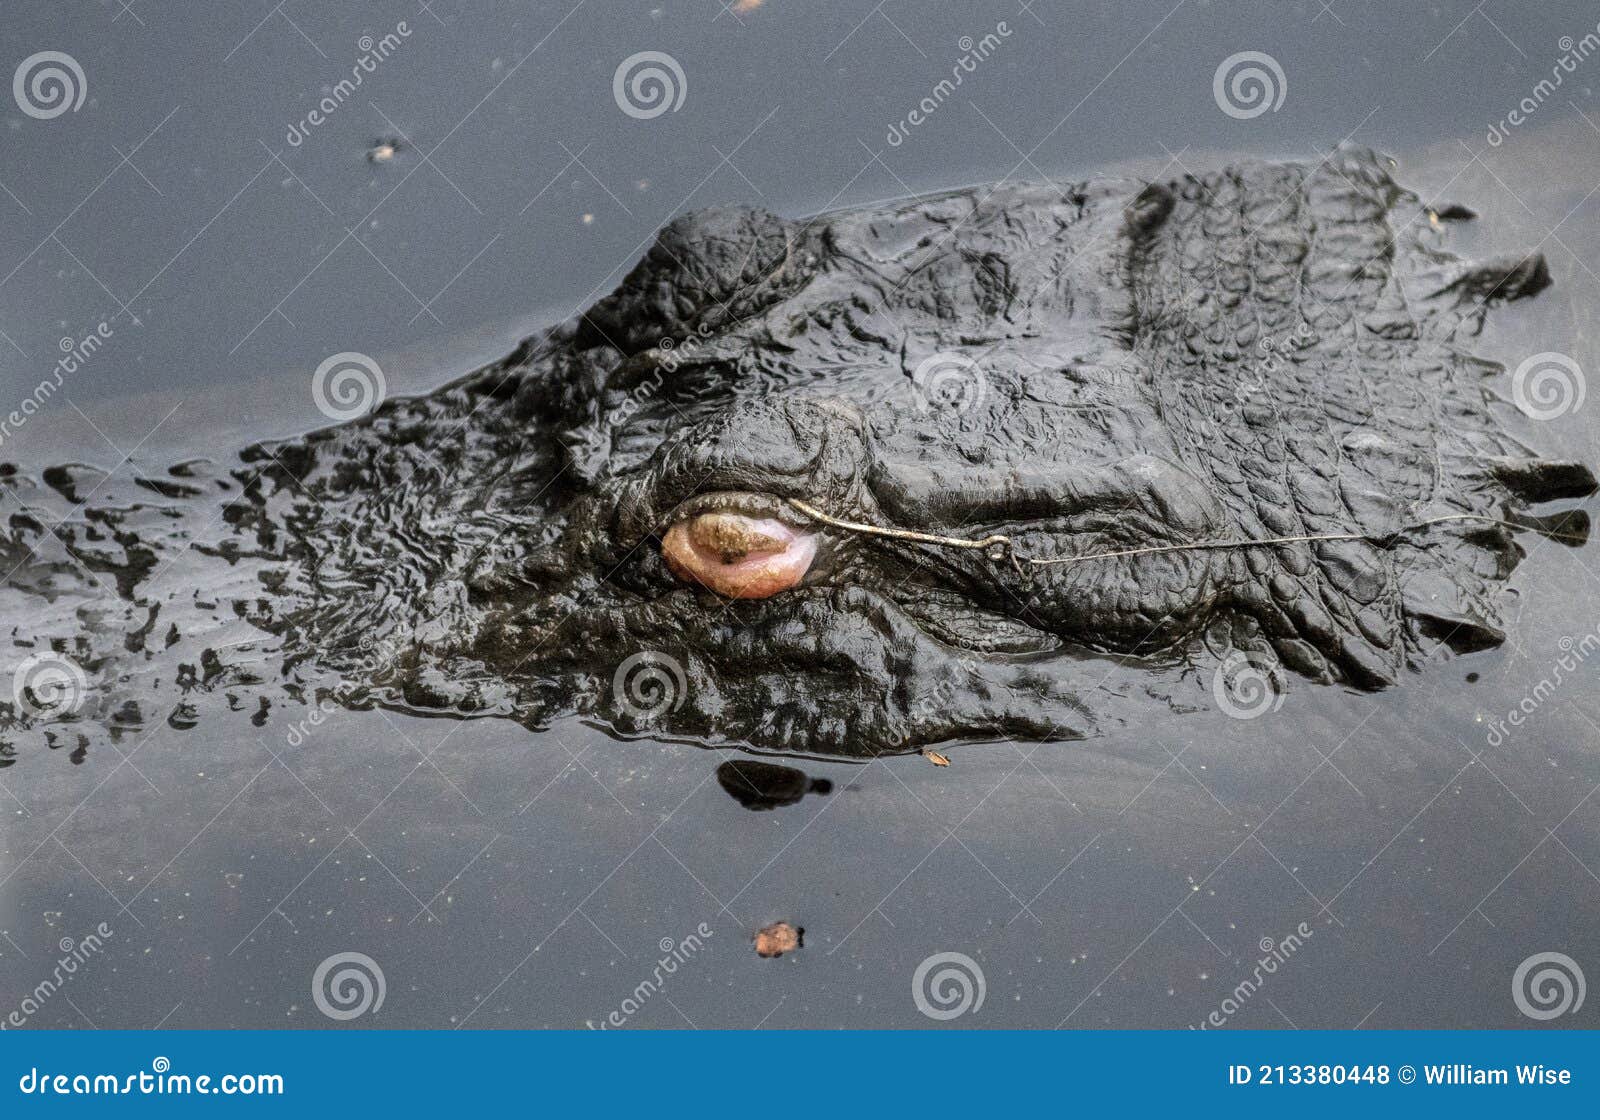 Alligator with Fish Hook Stuck in Eye Stock Photo - Image of late